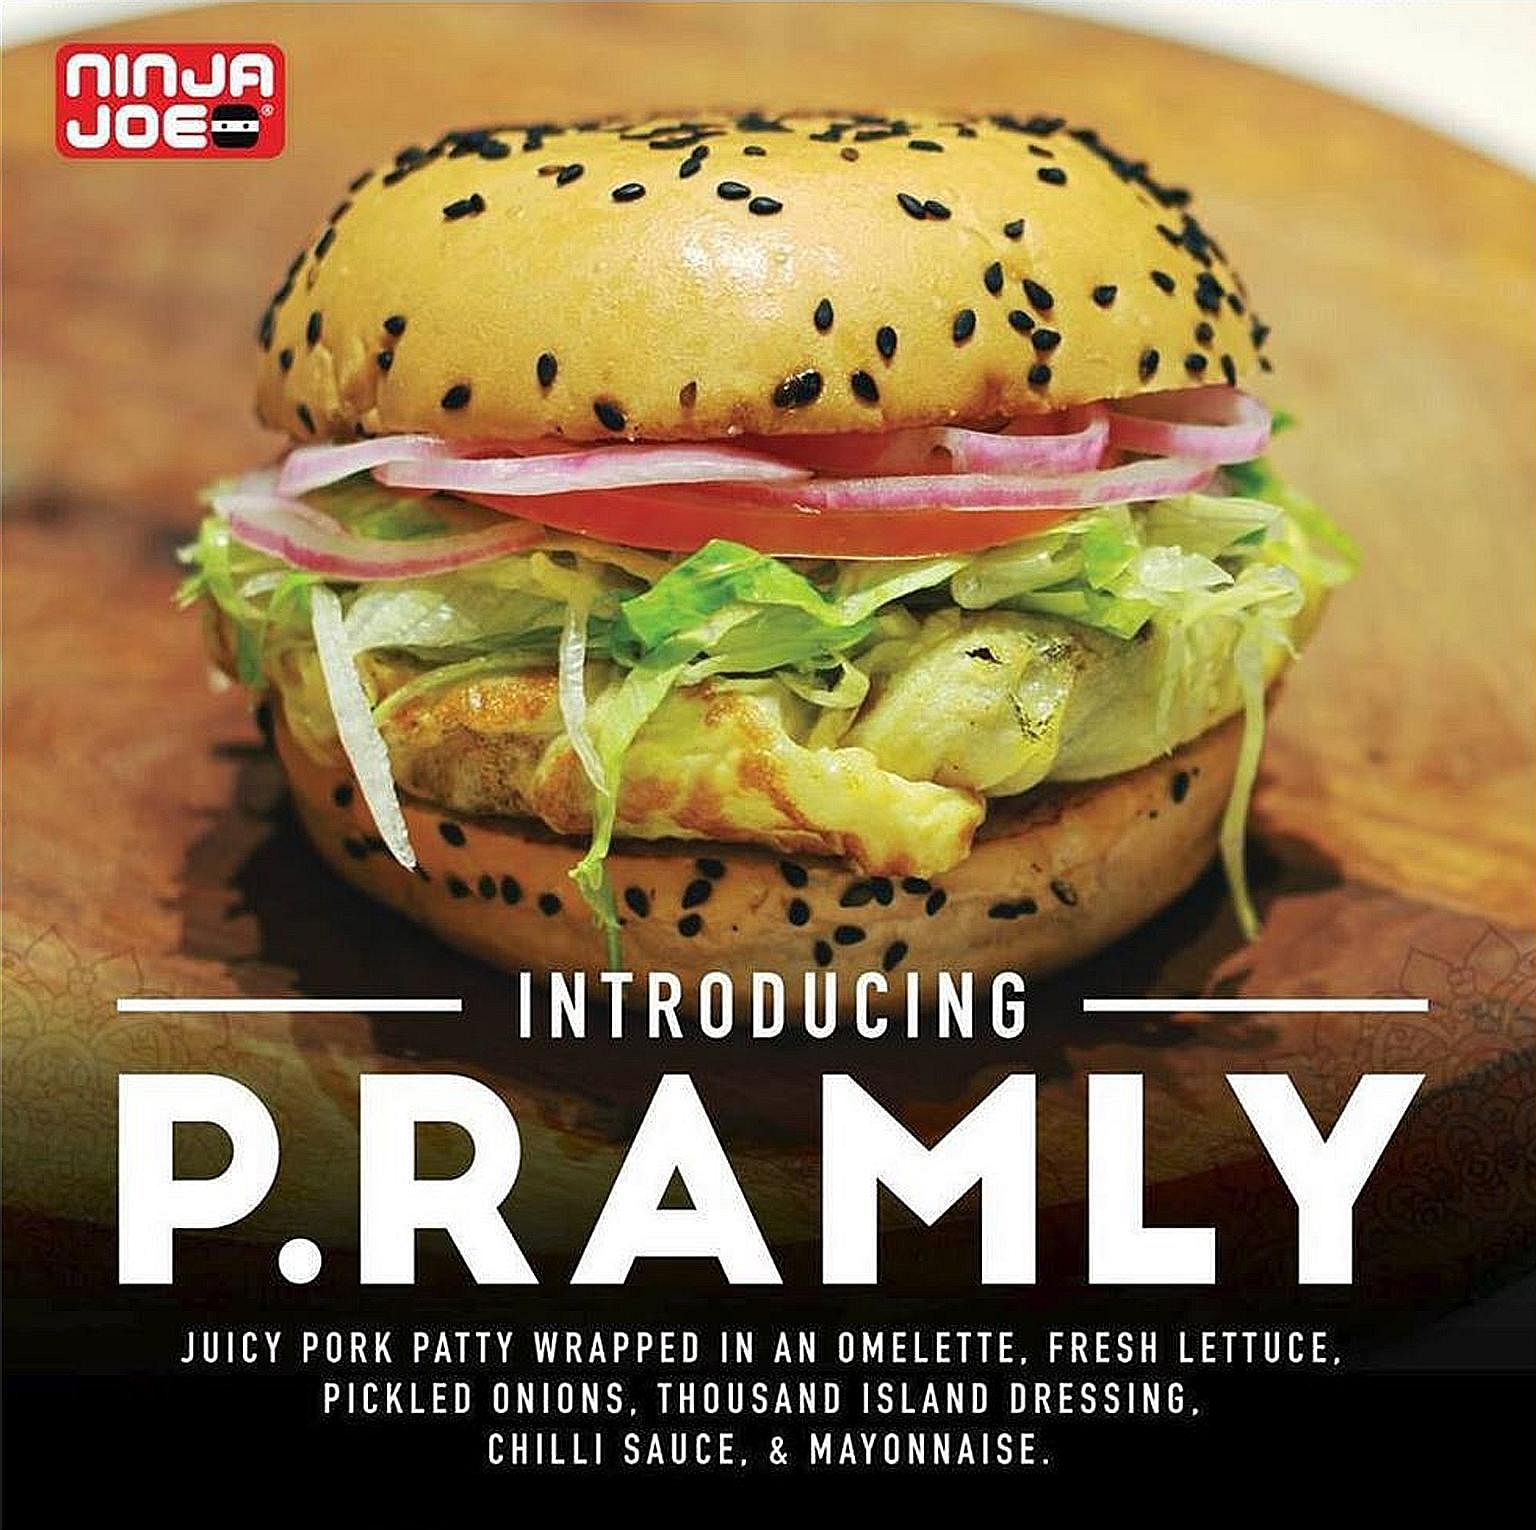 Ninja Joe said on its Facebook page that it has removed posters of the burger from its outlets and has ceased the use of the P. Ramly name with immediate effect.